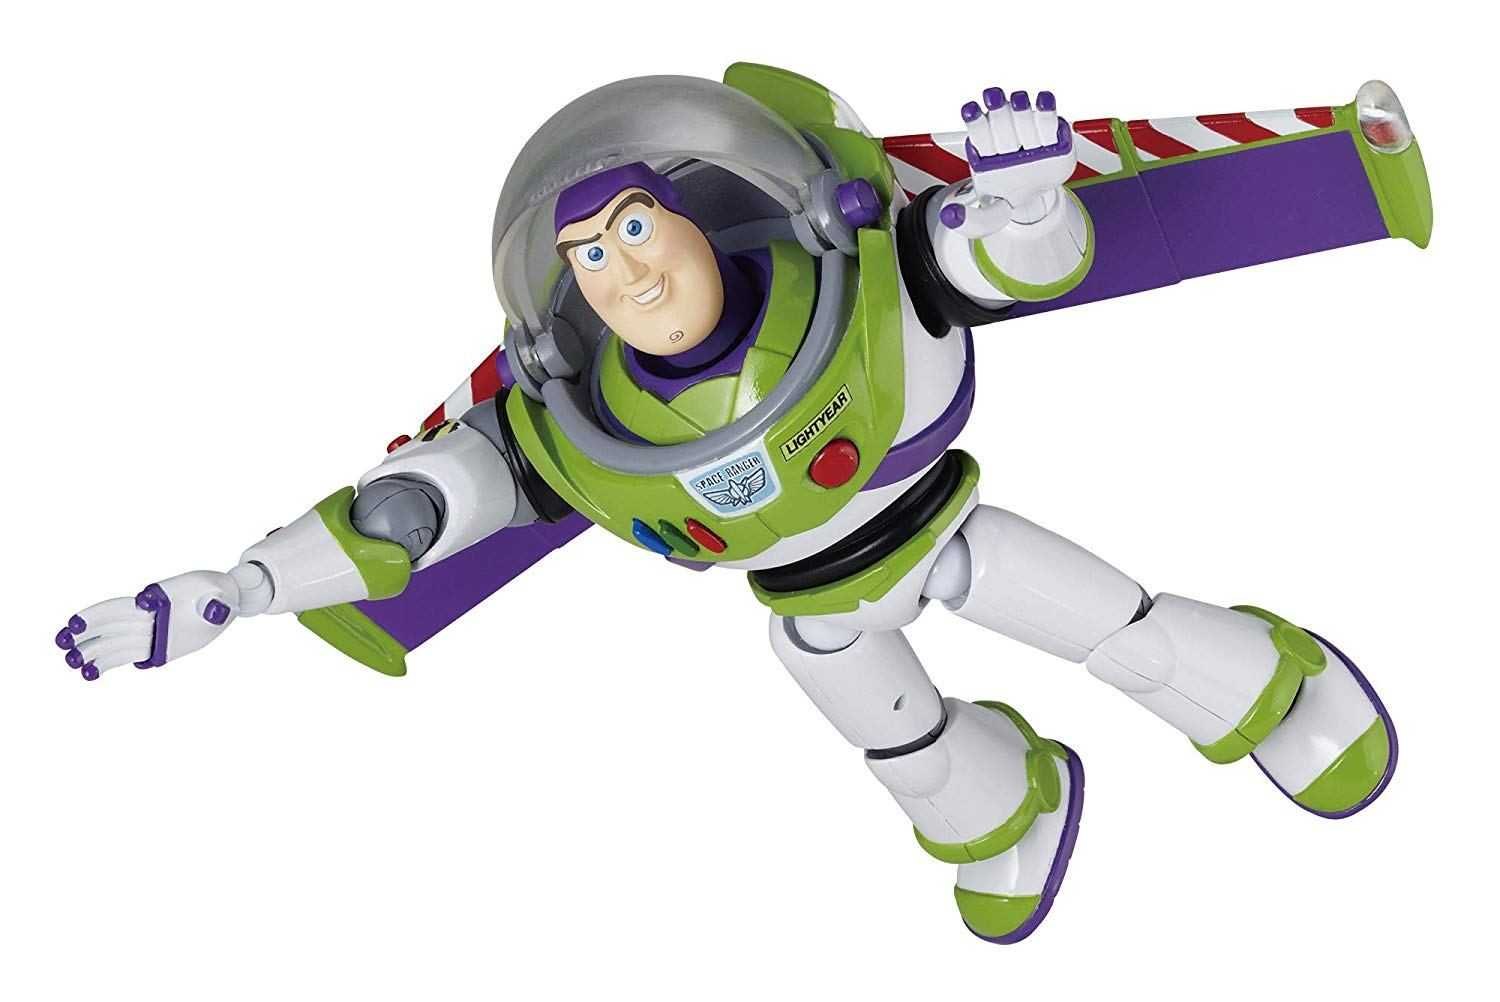 LEGACY OF REVOLTECH TOY STORY: BUZZ LIGHTYEAR RENEWAL PACKAGE DESIGN VER. Kaiyodo